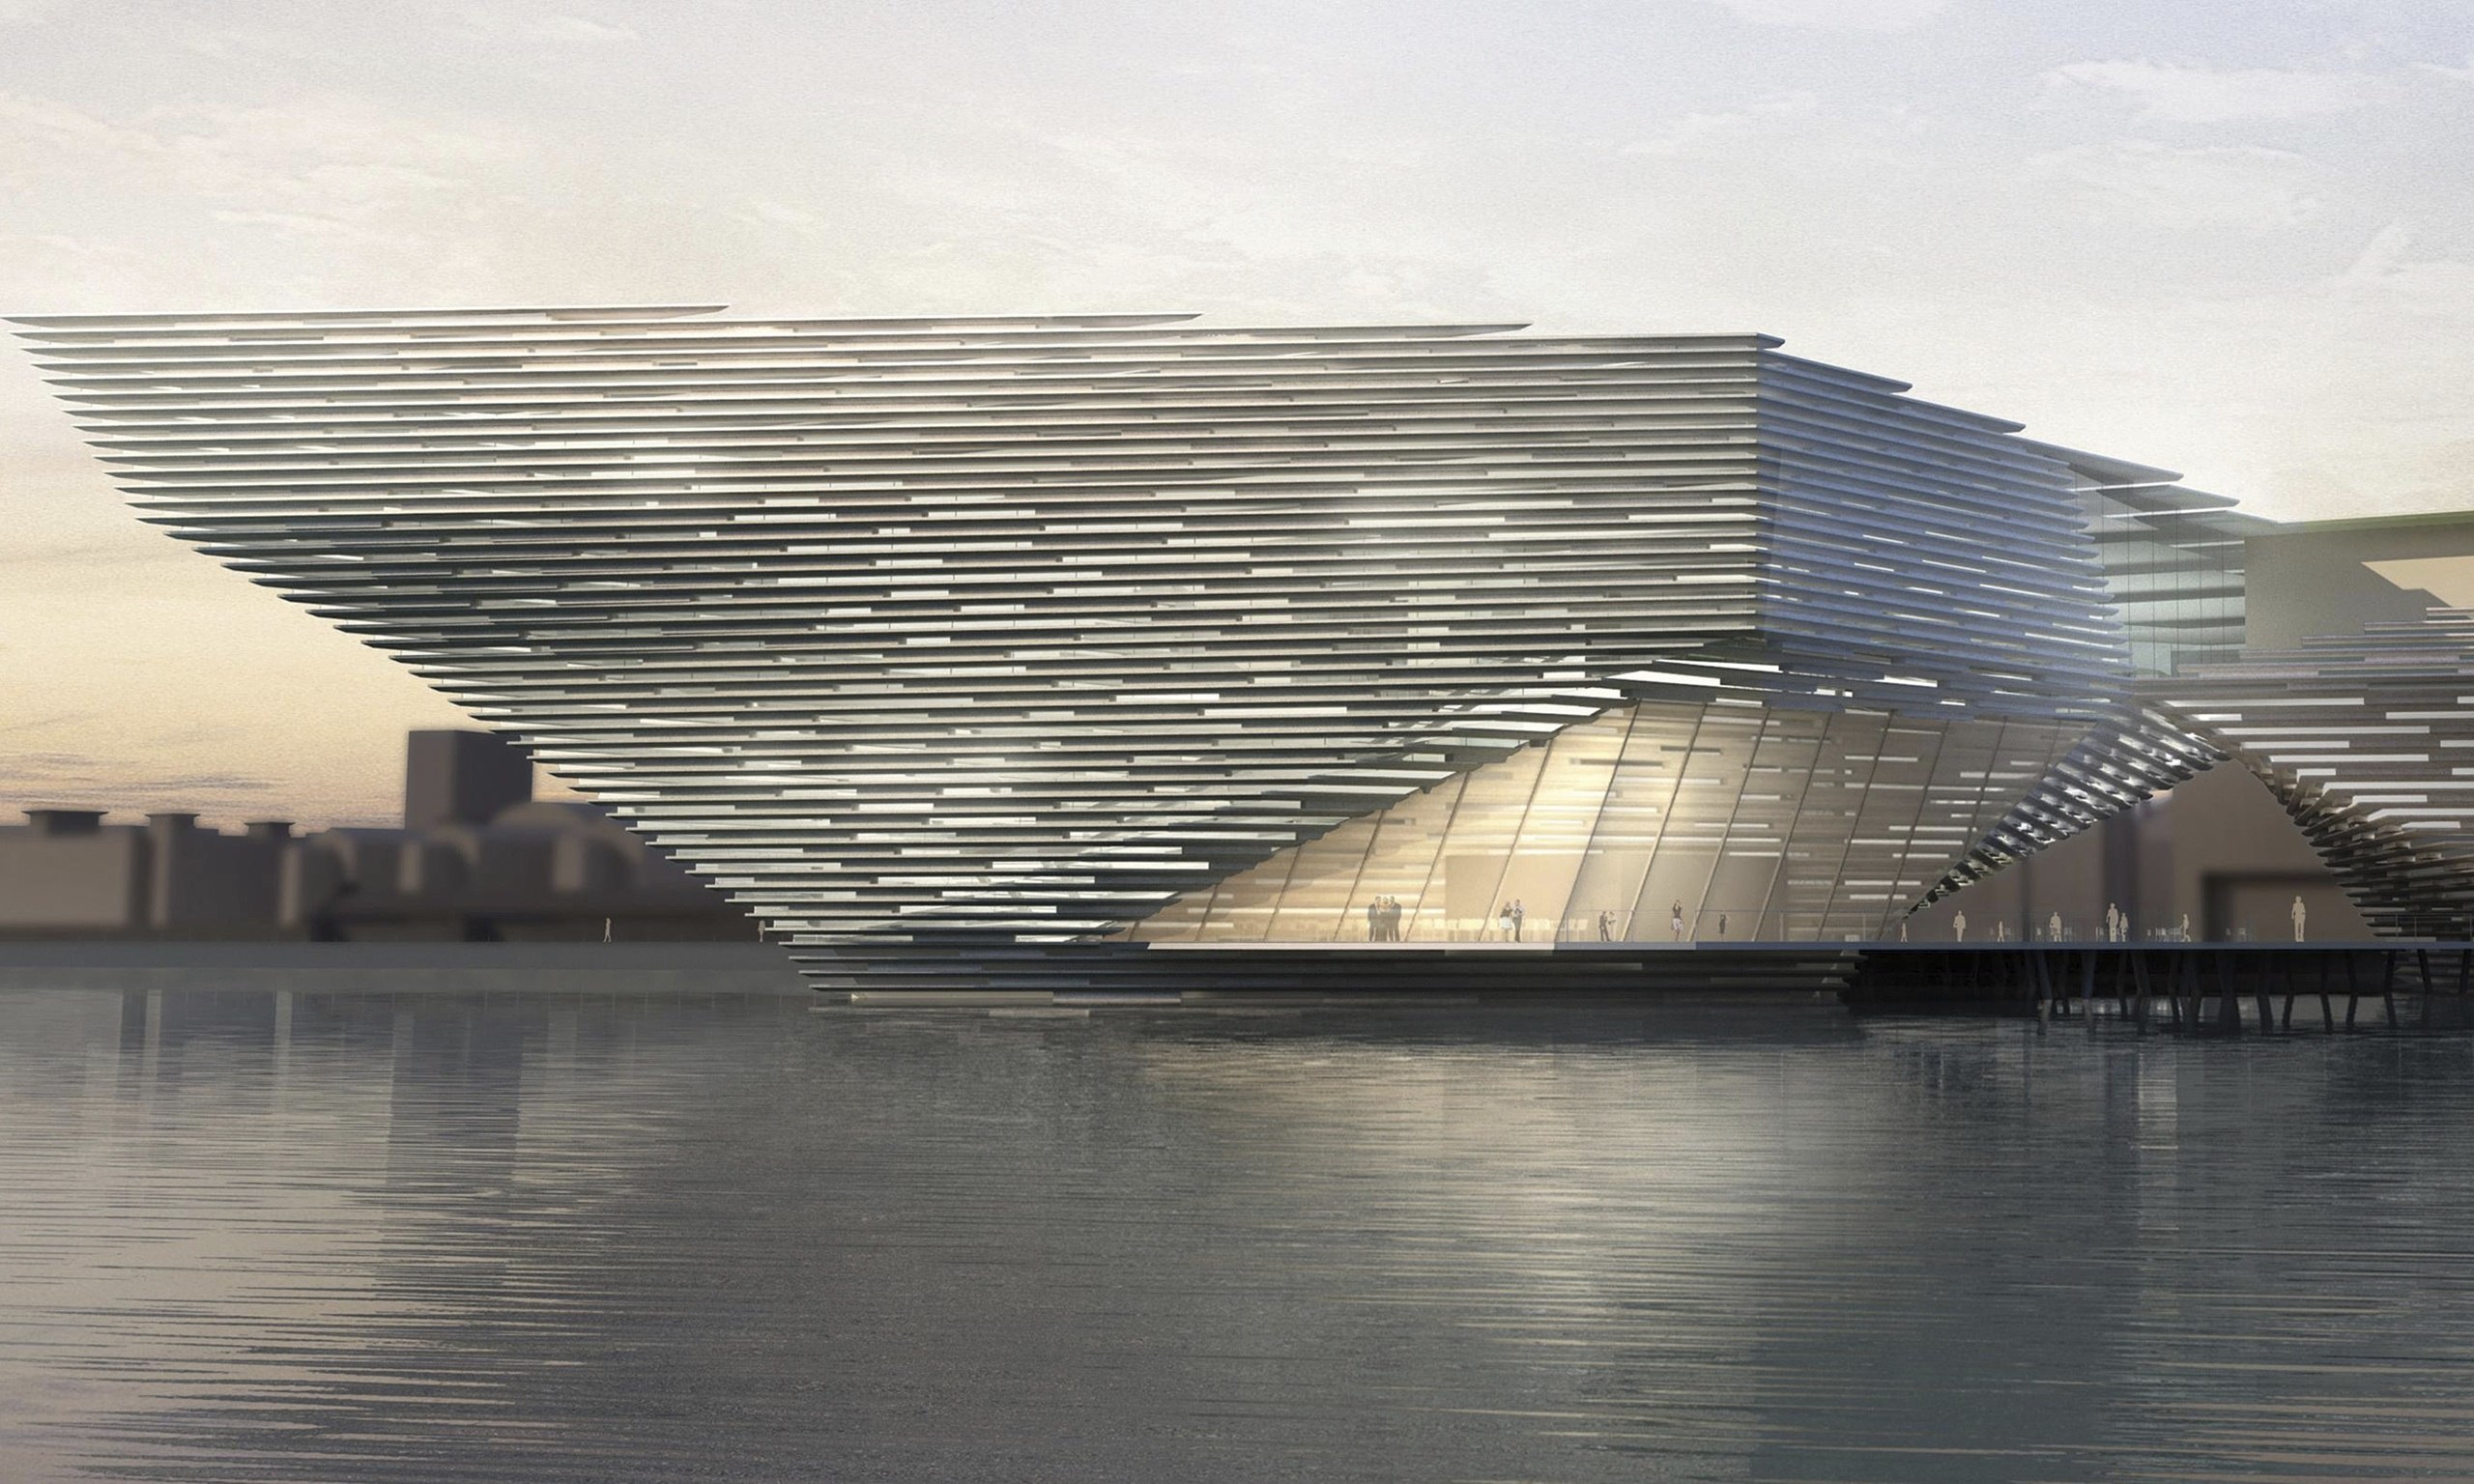 v&a to start work on dundee-based museum following lottery